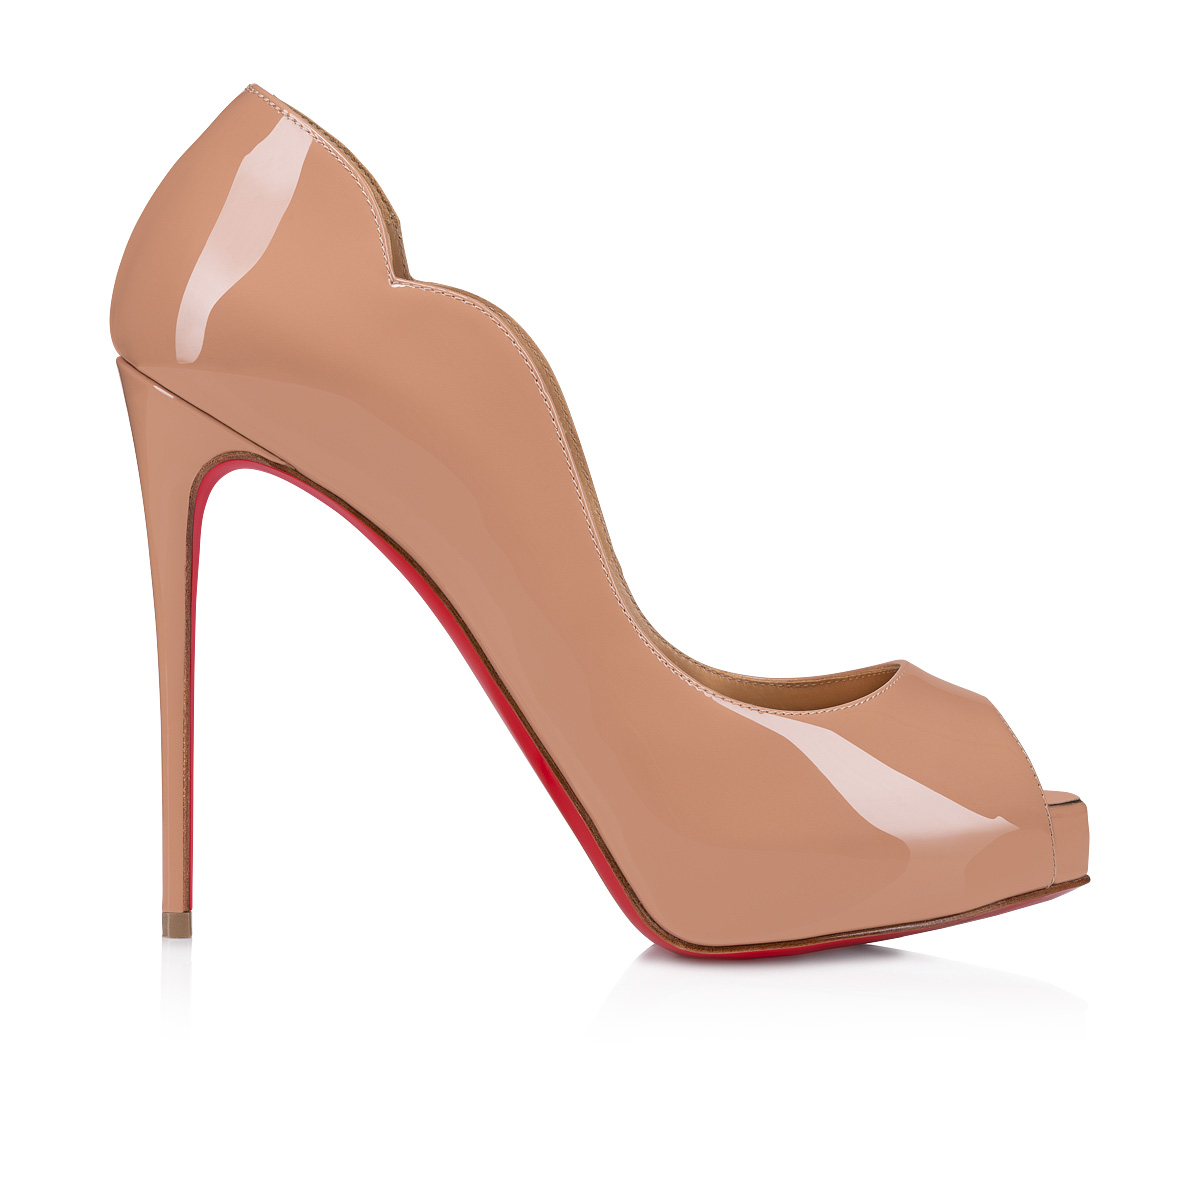 Christian Louboutin Pumps Round Chick Alta Peep Toe Sandals Shoes 36 Nude / Beige